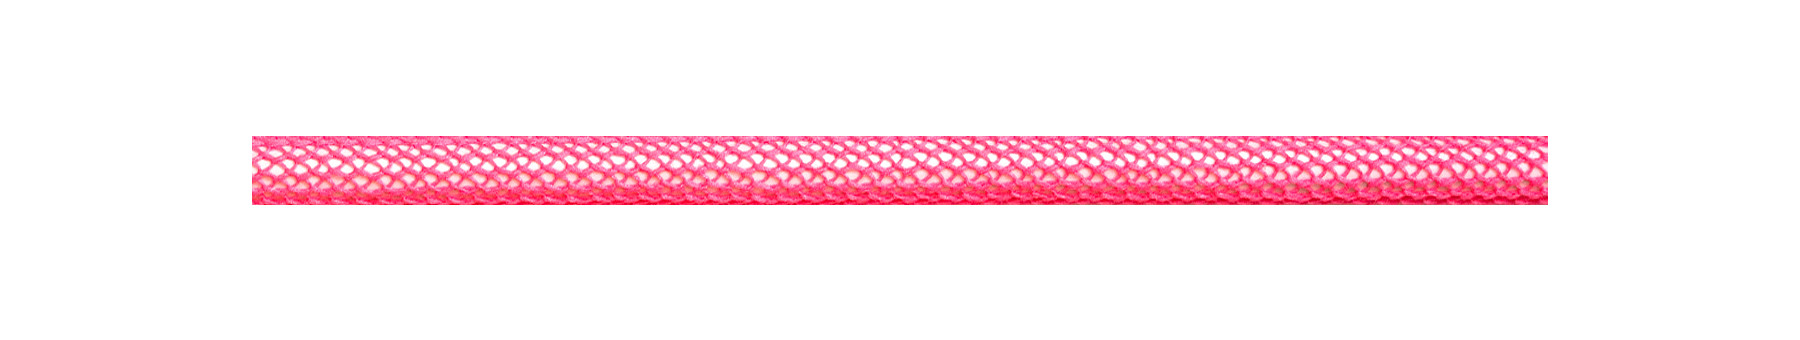 Textile Cable Neon Pink Netlike Covering